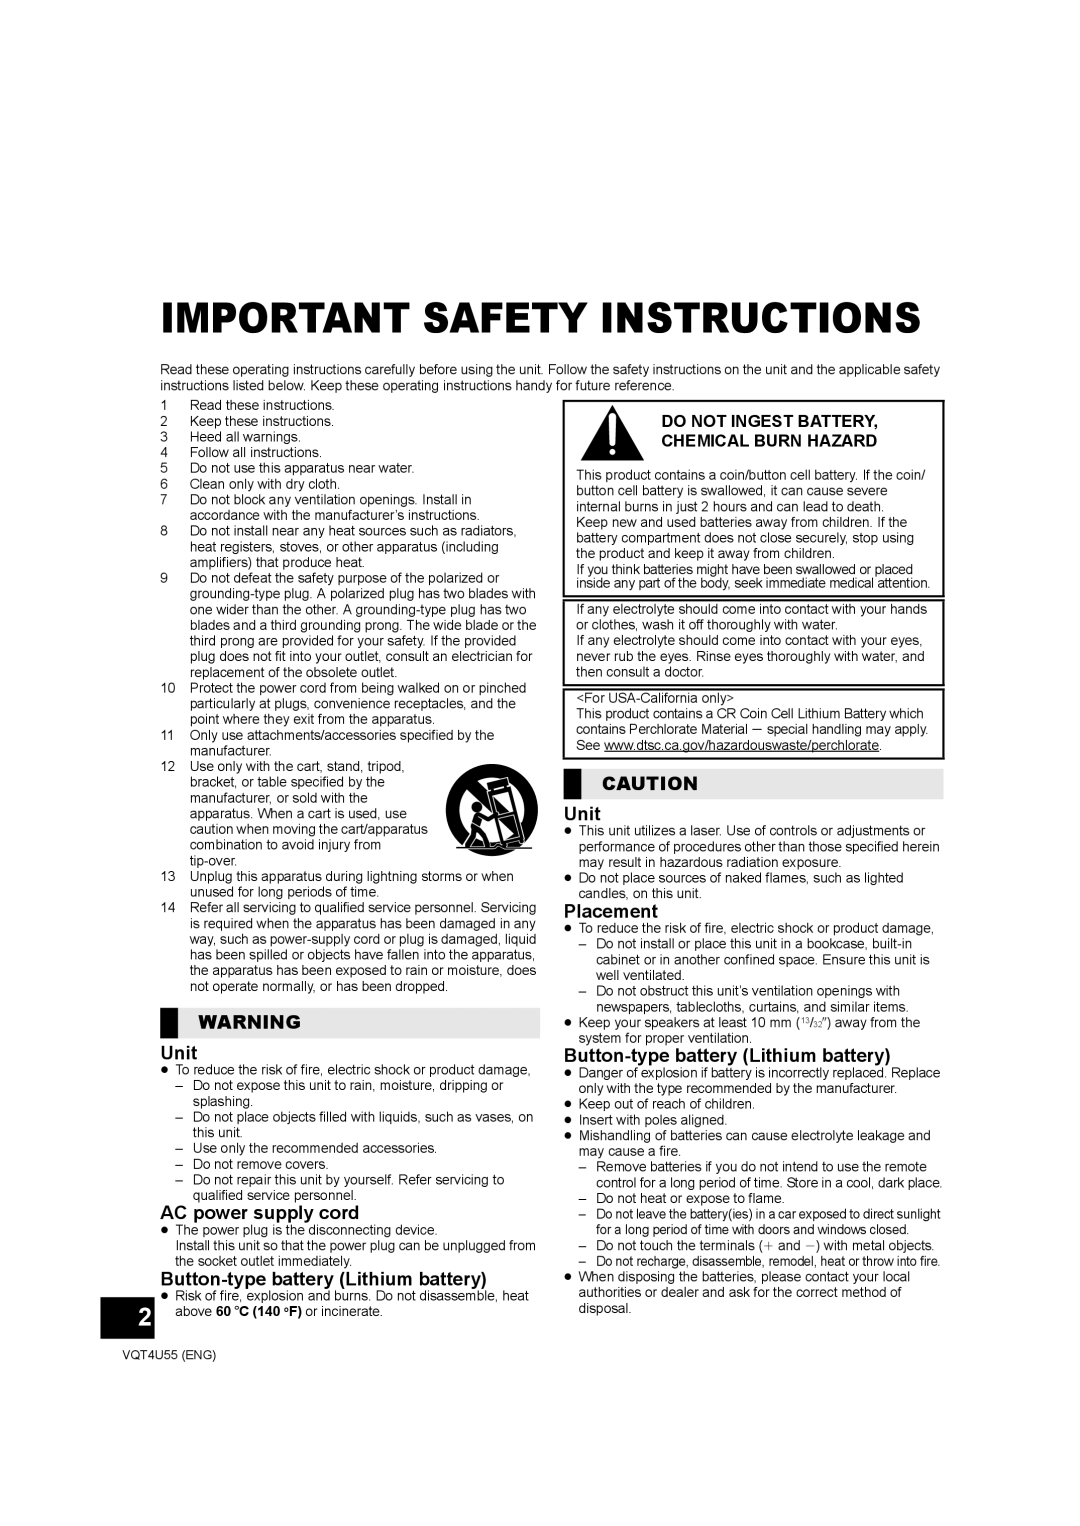 Panasonic SC-NE5 Unit, AC power supply cord, Button-typebattery Lithium battery, Placement, Important Safety Instructions 